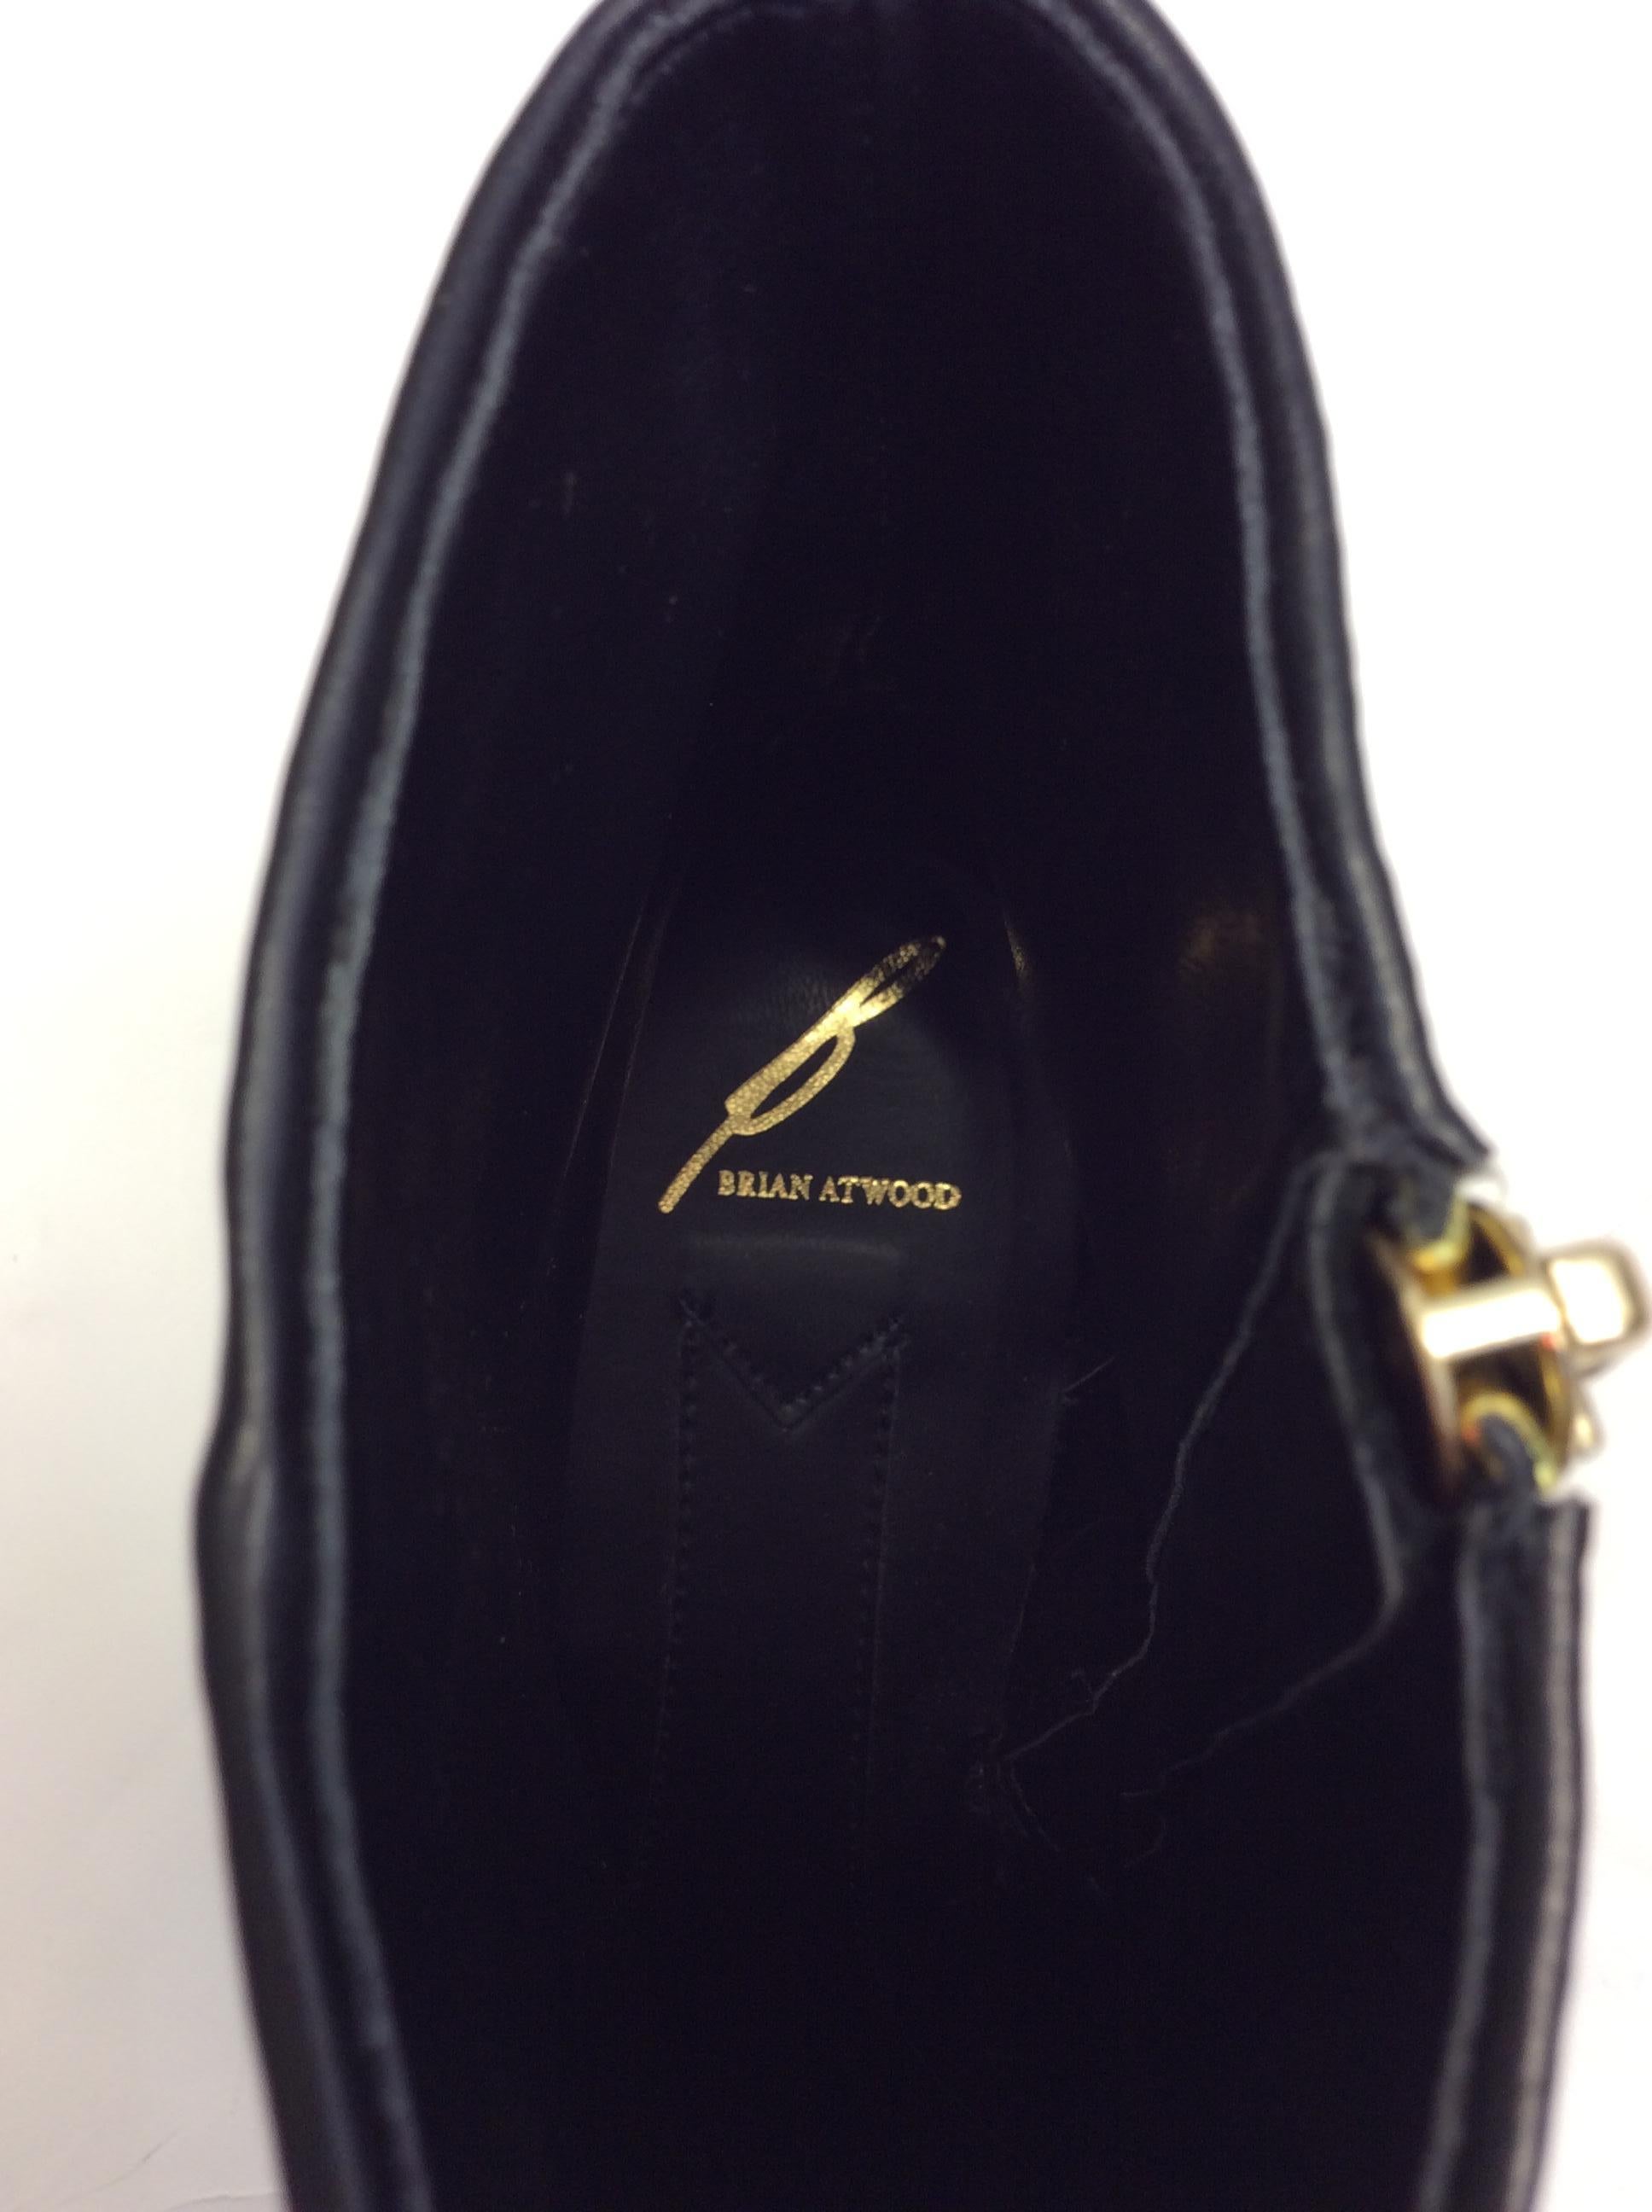 Brian Atwood Black Suede Ankle Boot For Sale 3